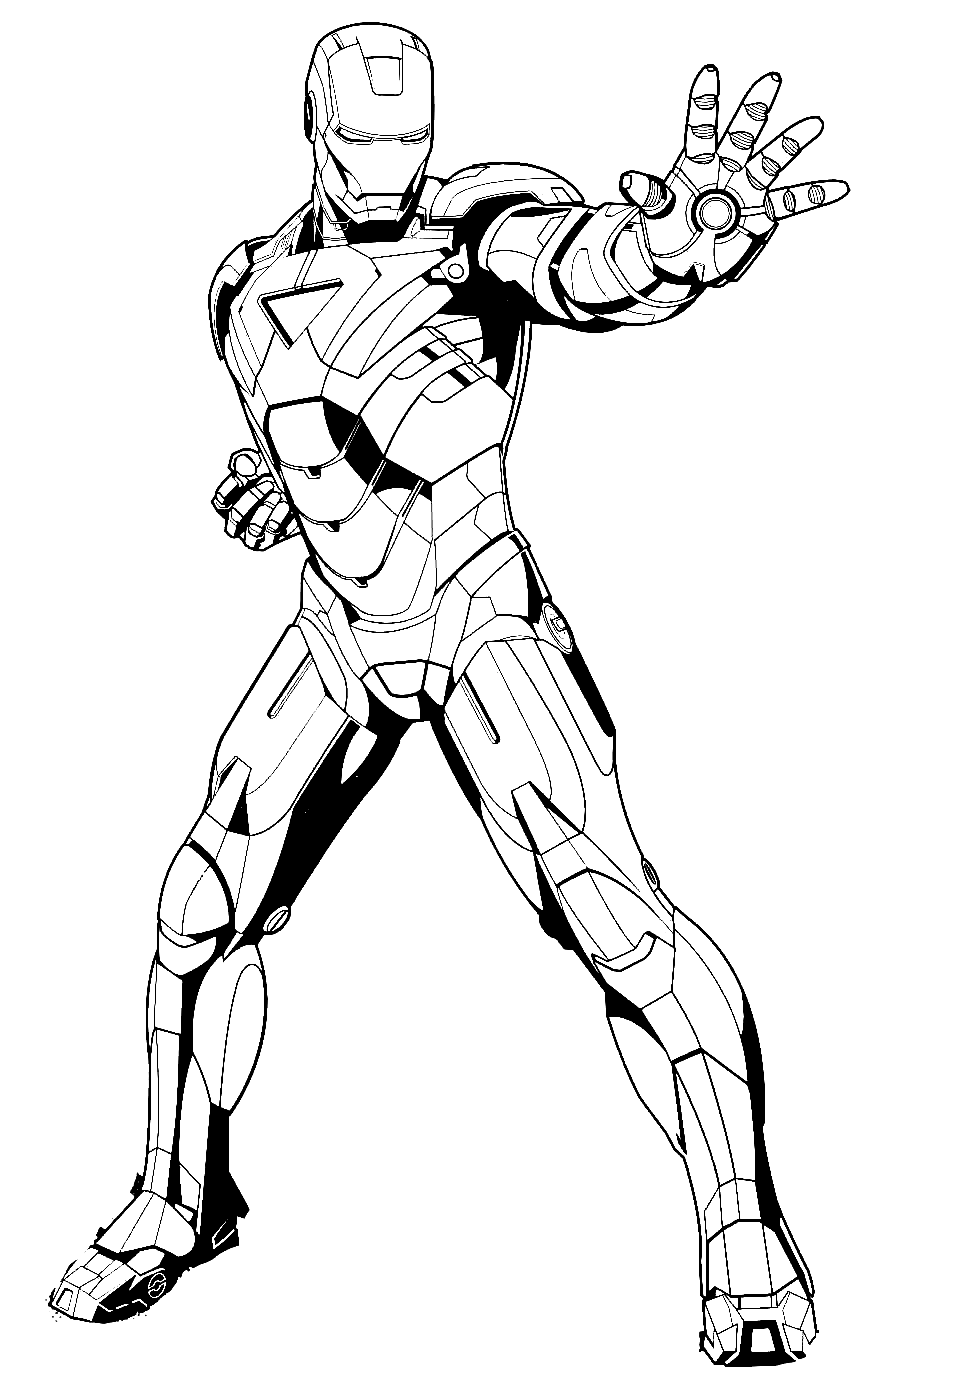 Iron man from Iron man movie tries to stop the enemy Coloring Page